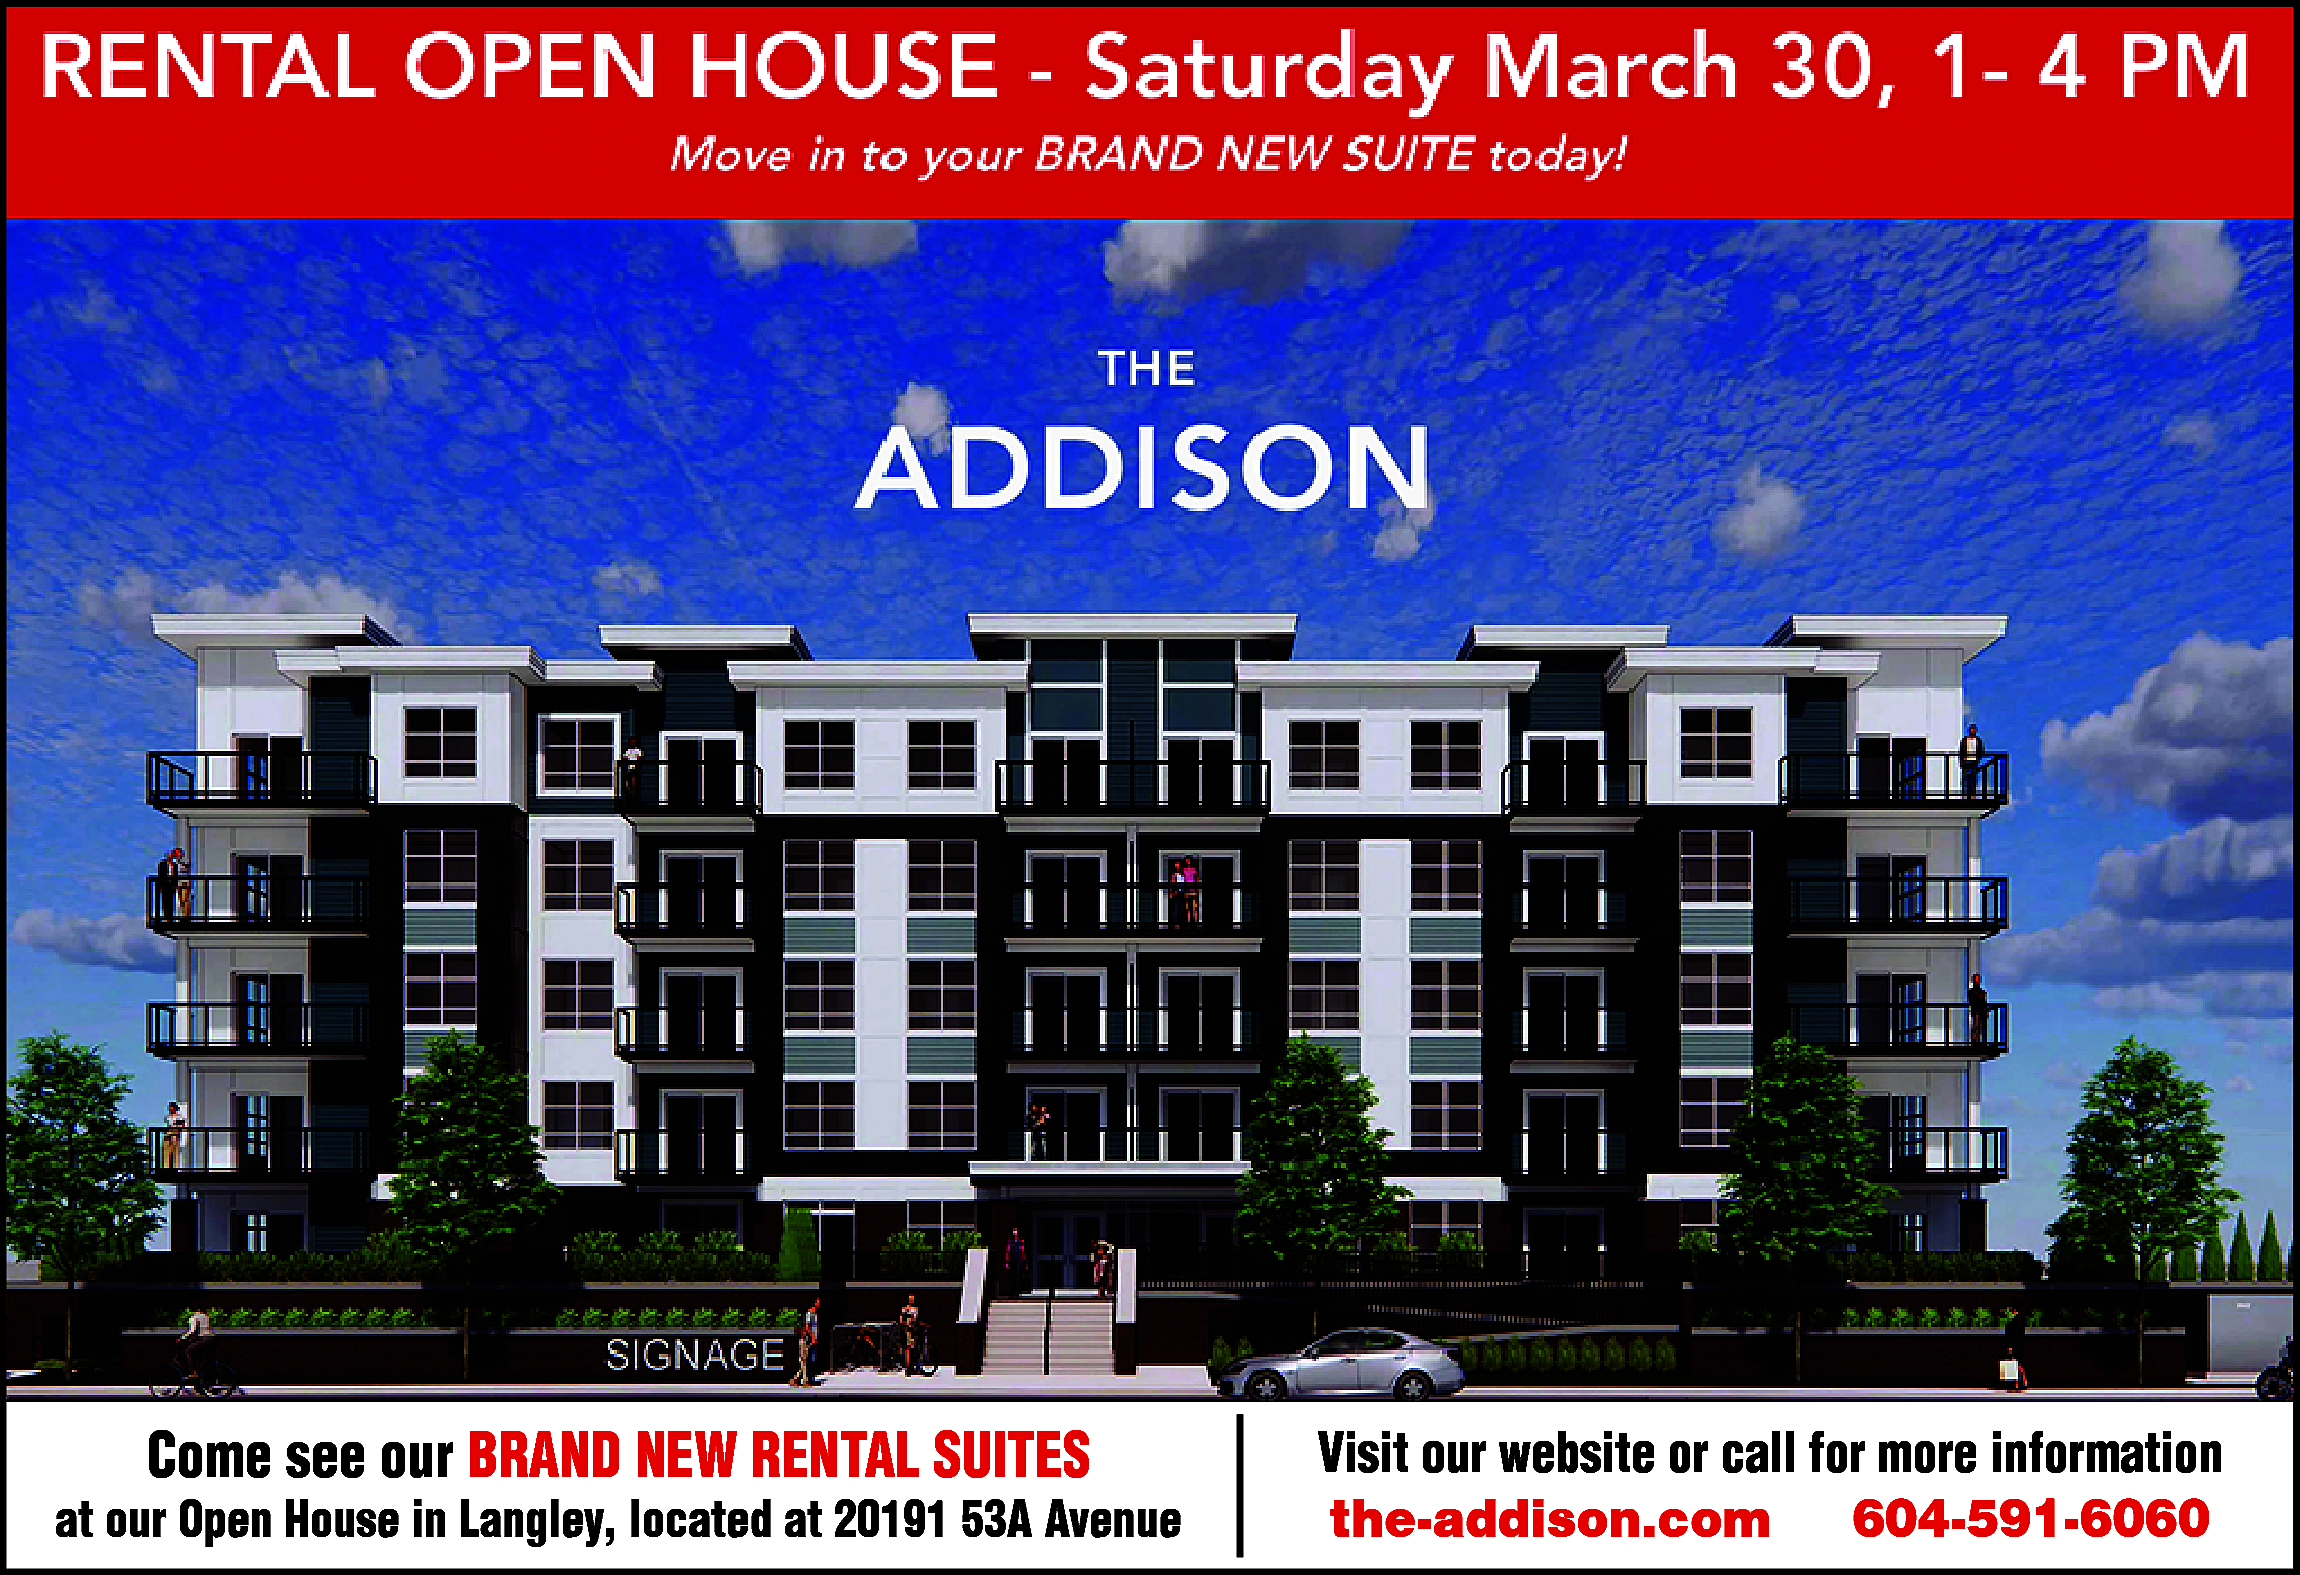 Come see our BRAND NEW  Come see our BRAND NEW RENTAL SUITES    at our Open House in Langley, located at 20191 53A Avenue    Visit our website or call for more information  the-addison.com 604-591-6060    